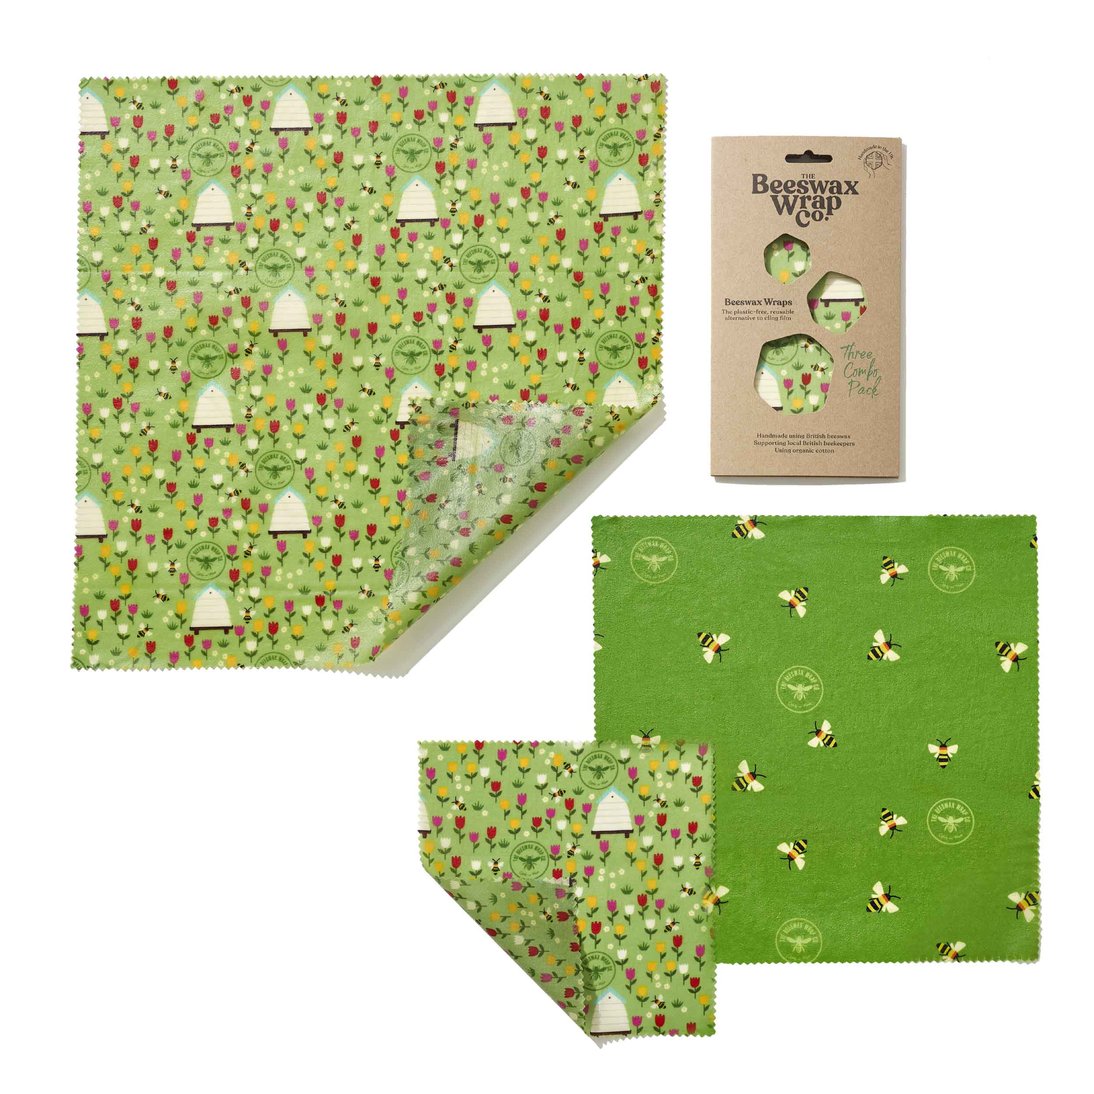 The Beeswax Wrap Co. 3PK Land Print